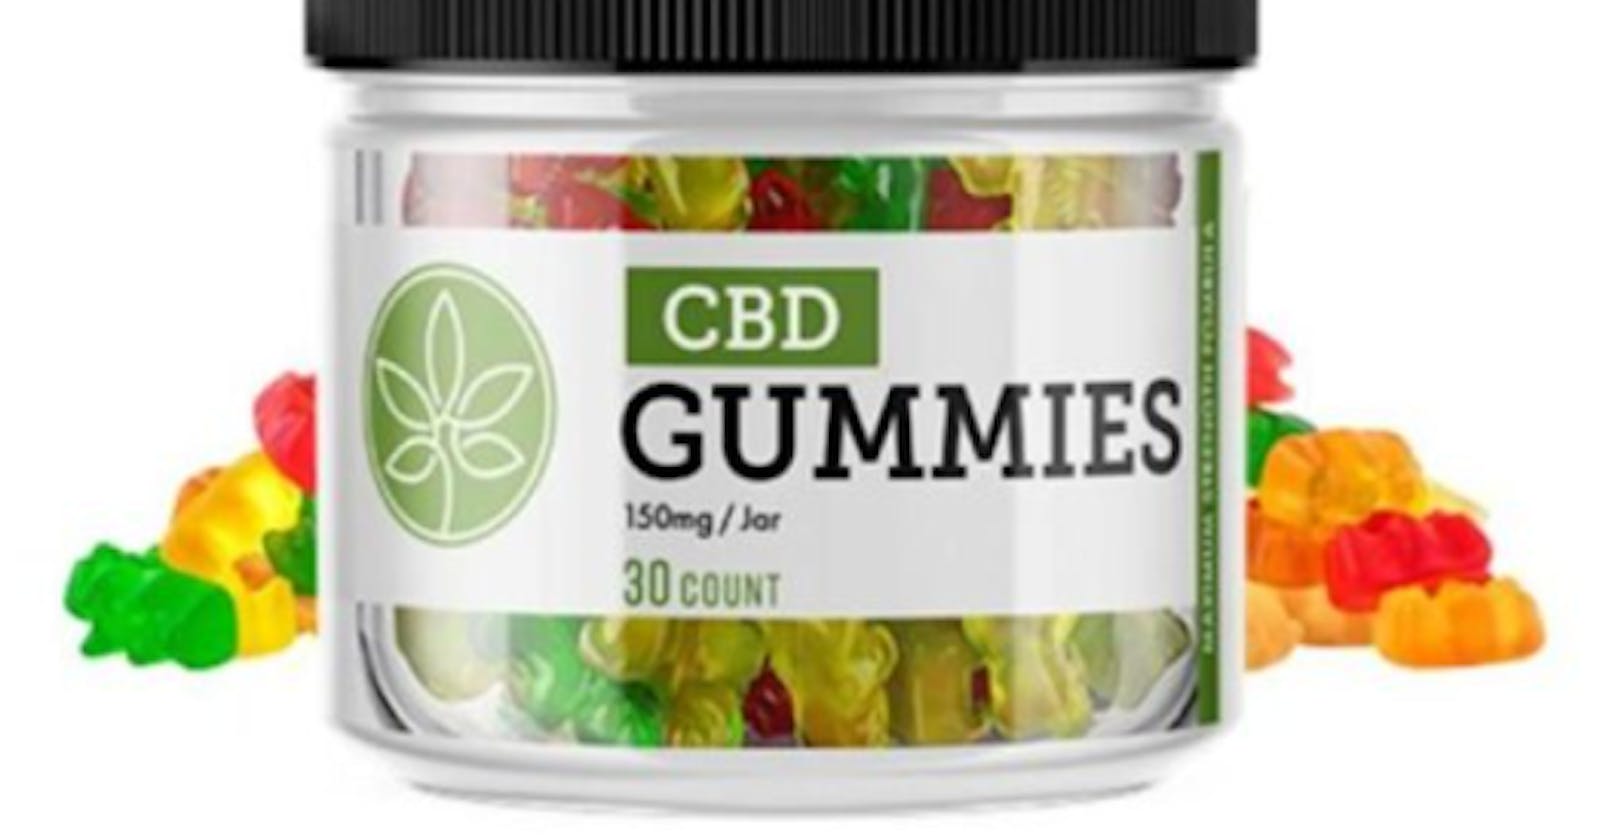 Are Woody Harrelson CBD Gummies Right for You? An Honest Assessment